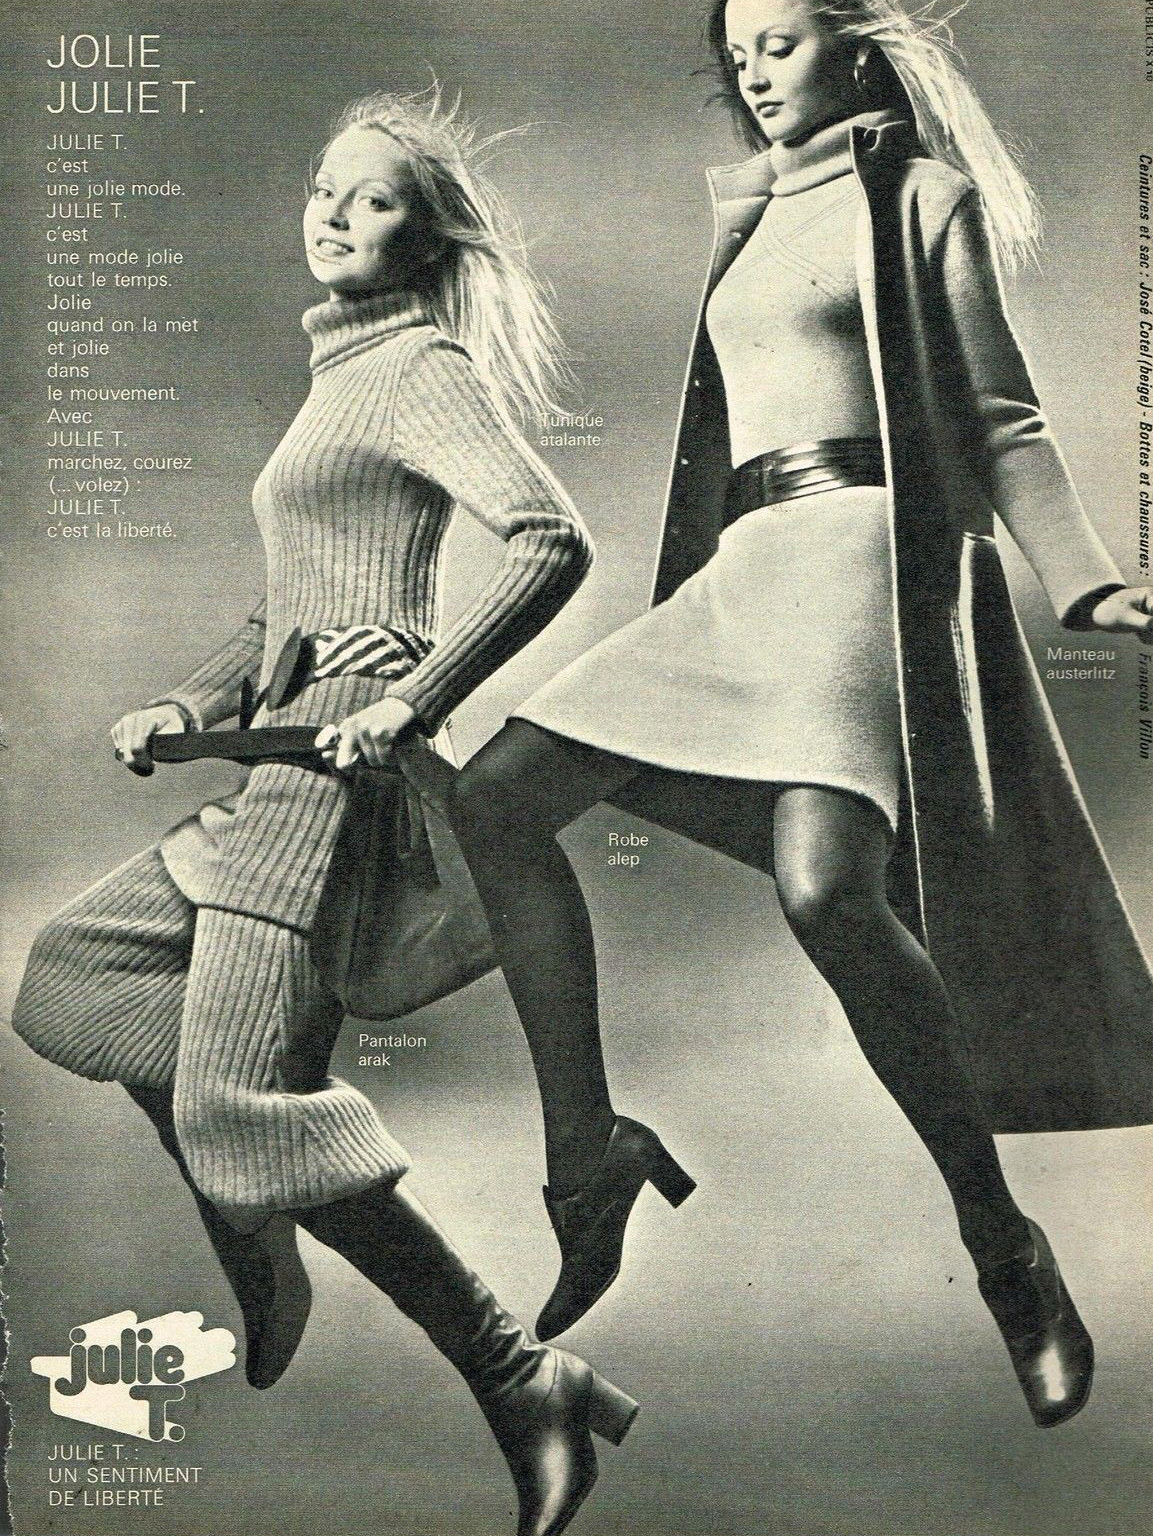 Pretty Publicité: Swinging Mademoiselles in 1960s French Fashion Ads